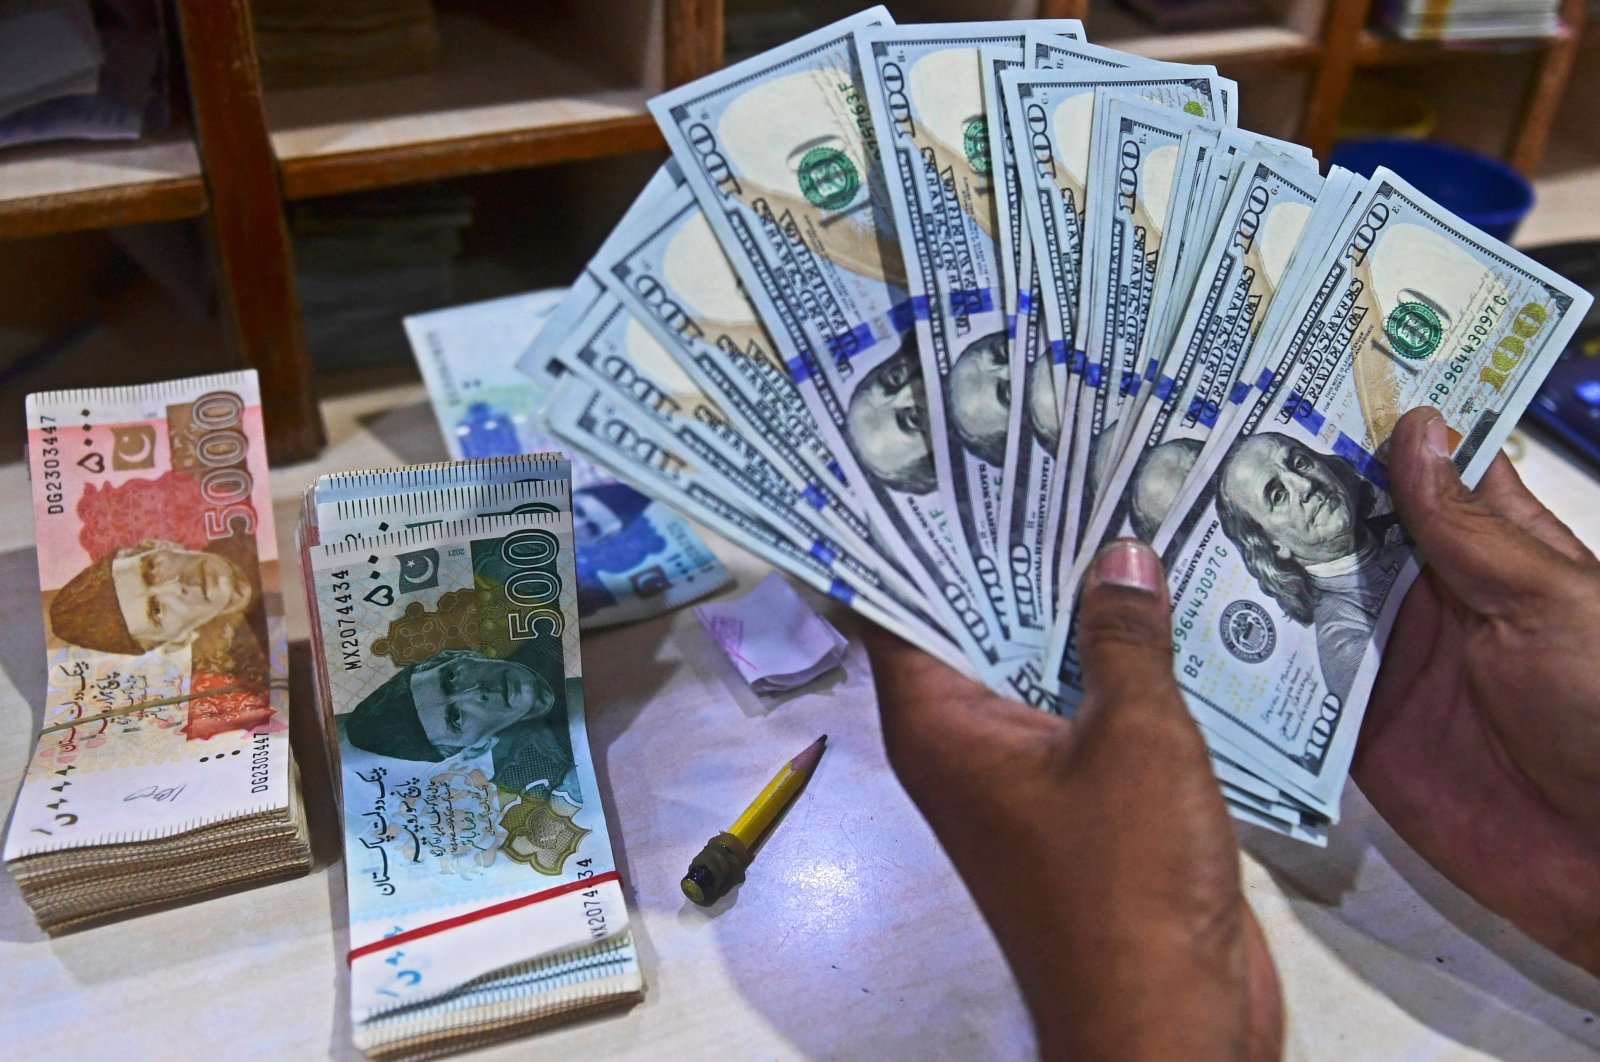 A foreign currency dealer counts U.S. dollars at a shop in Karachi, Pakistan, May 19, 2022. (AFP Photo)